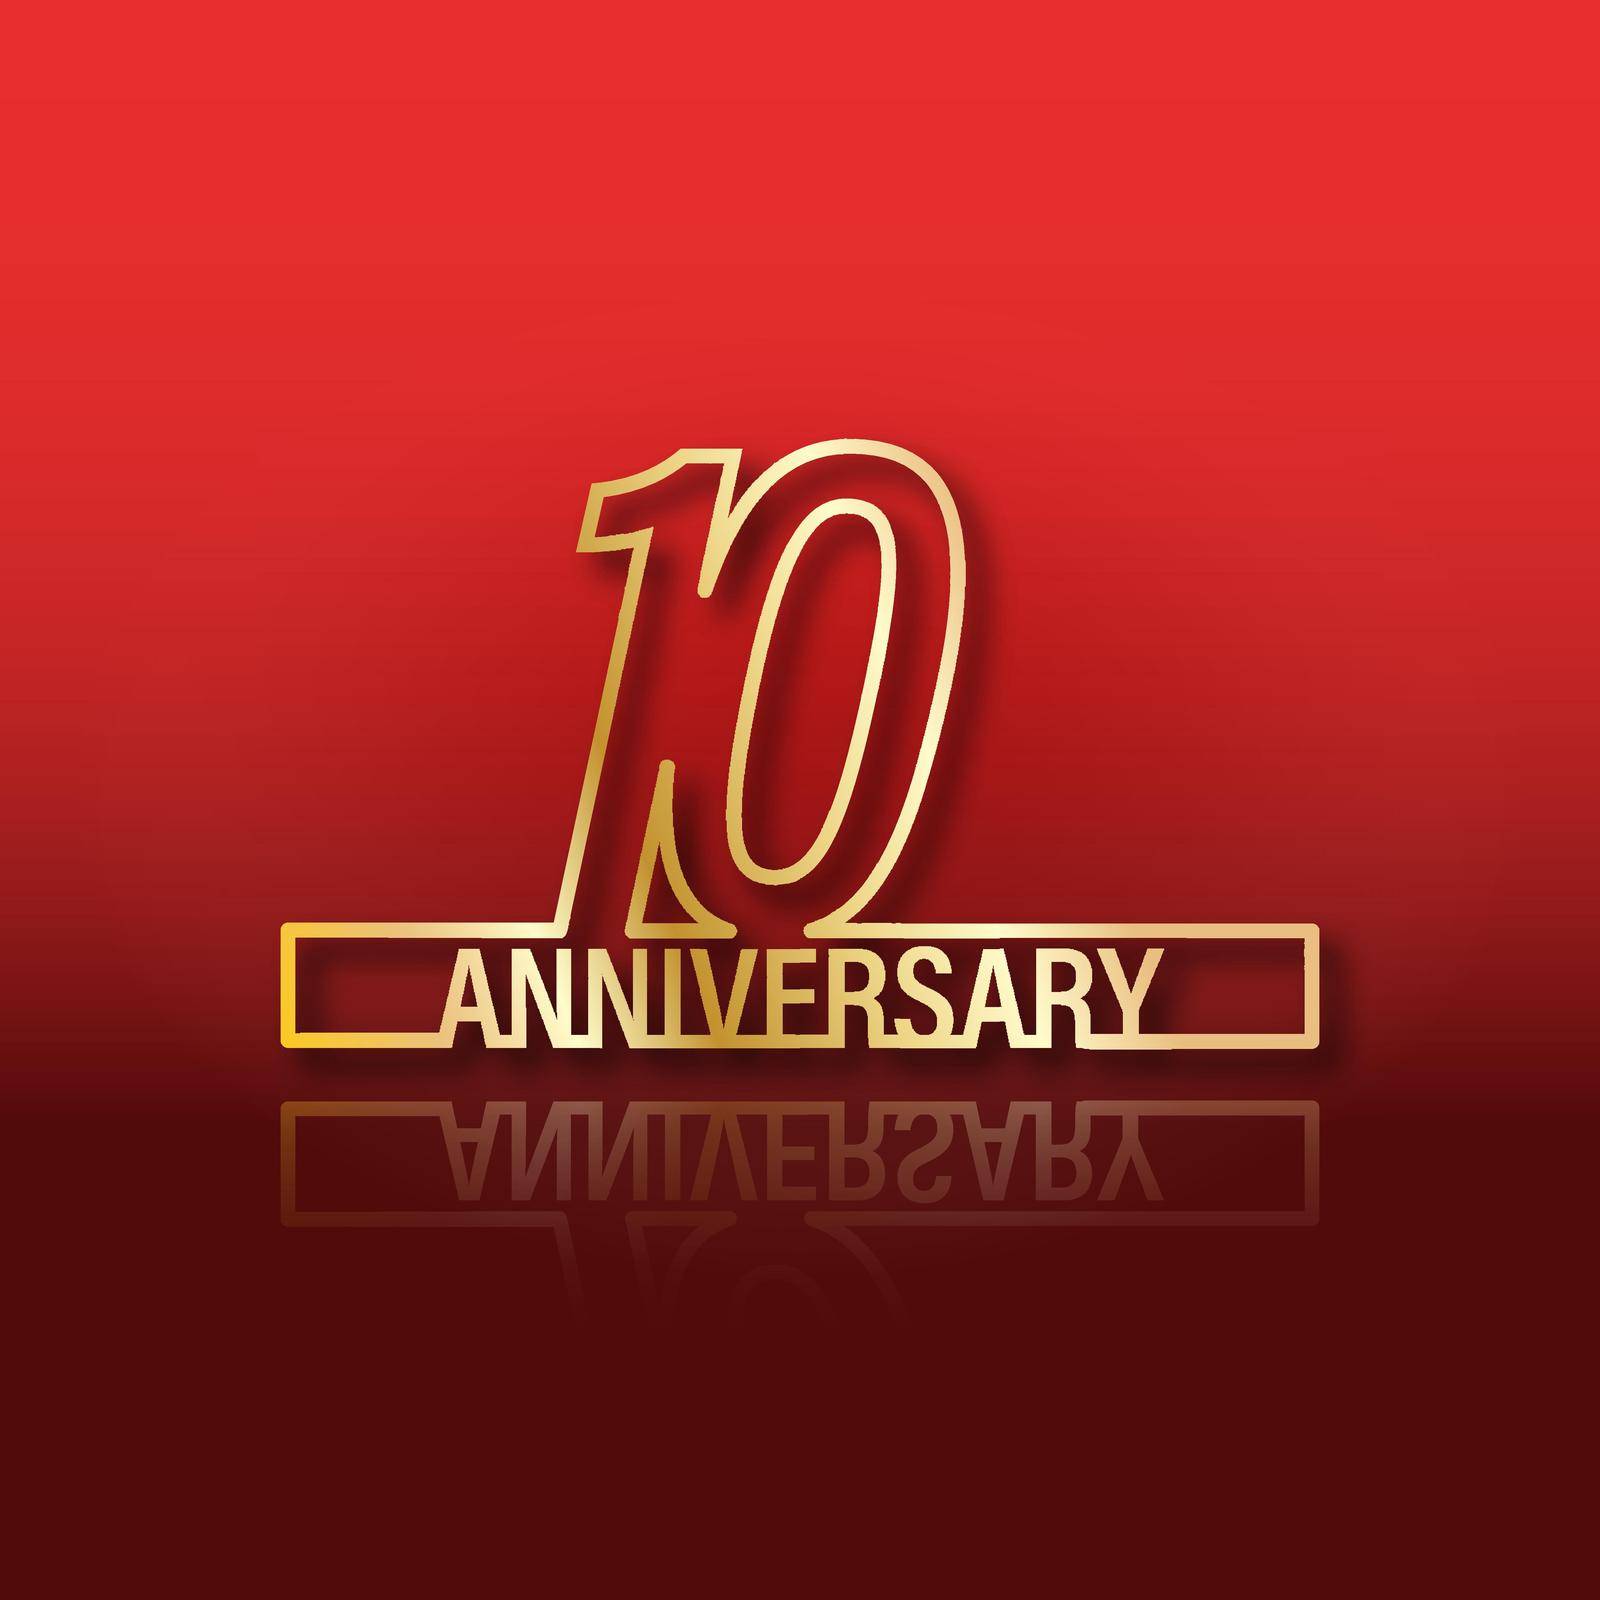 10 anniversary. Stylized gold lettering with reflection on a red gradient background by Grommik